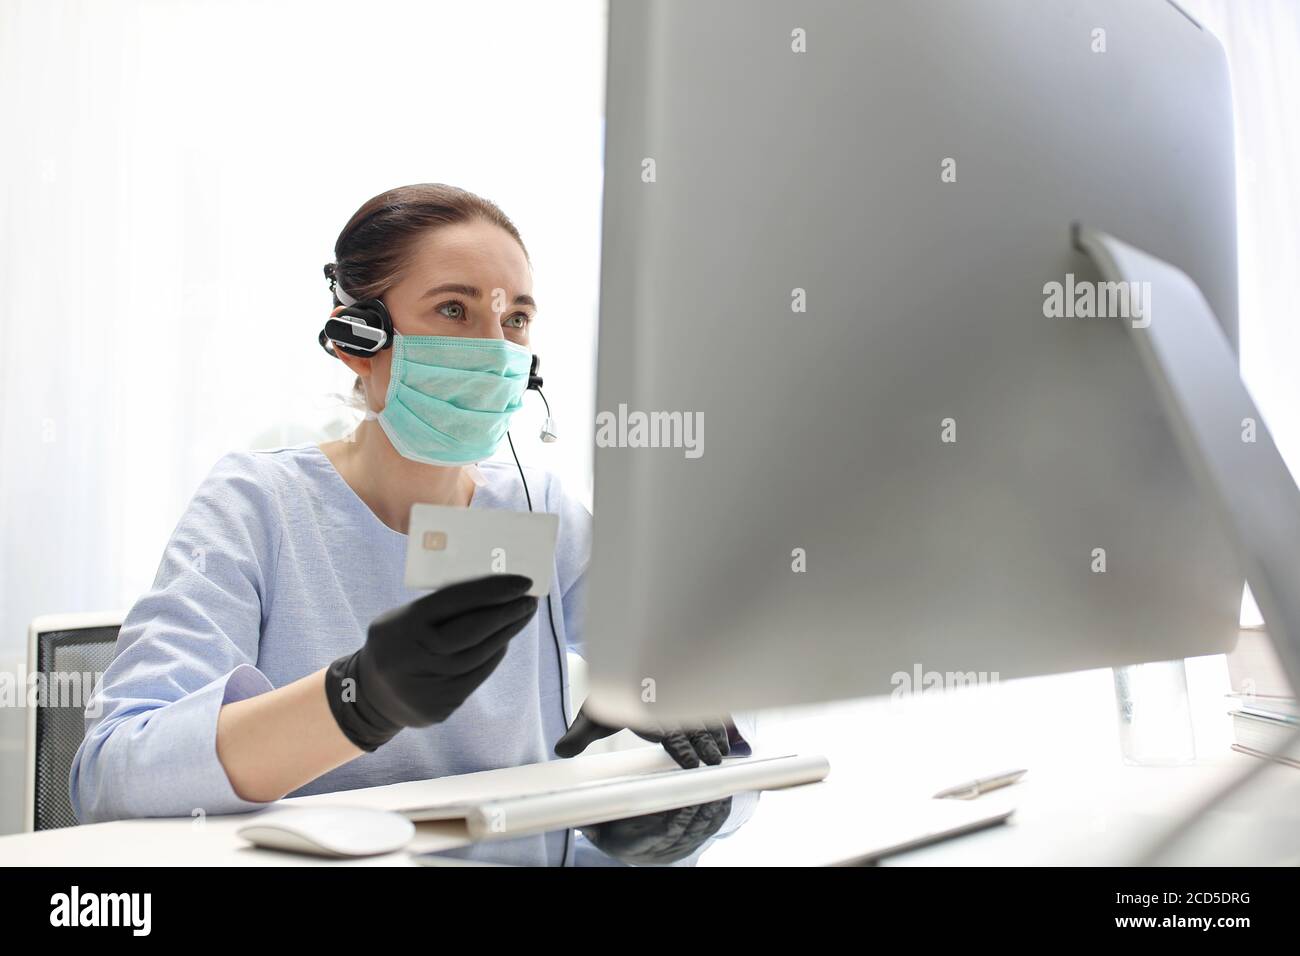 Remote work. A woman in a surgical mask works on the computer. Work during the plague Quarantine. Working at the computer in a mask. protection of emp Stock Photo